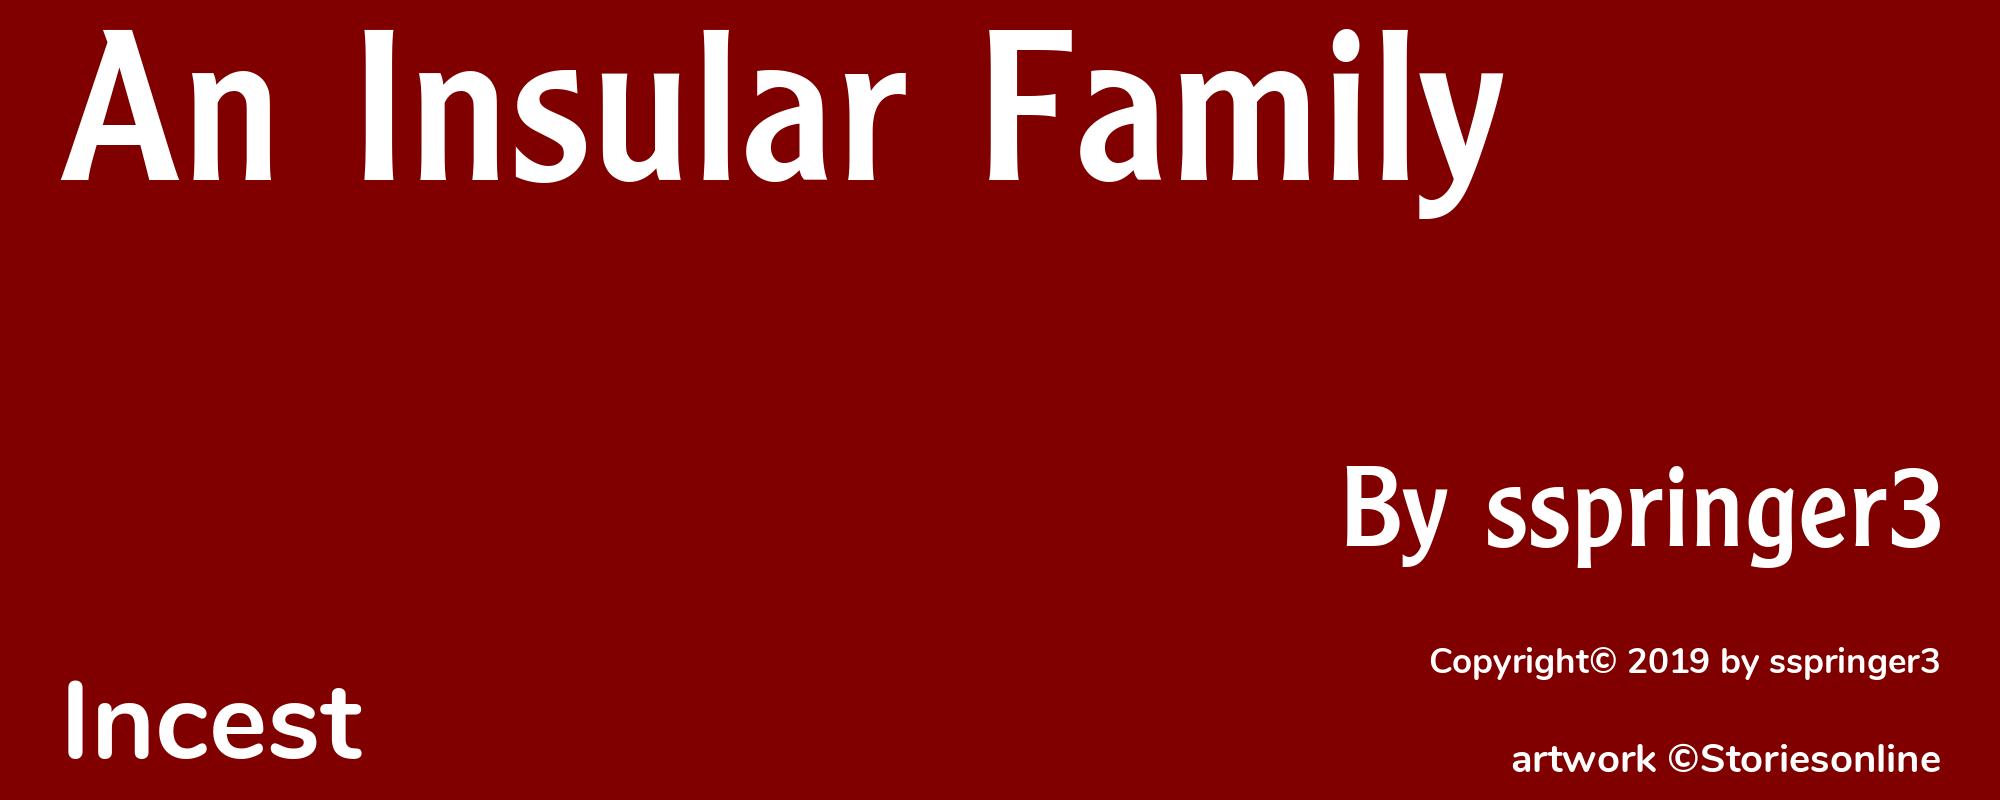 An Insular Family - Cover